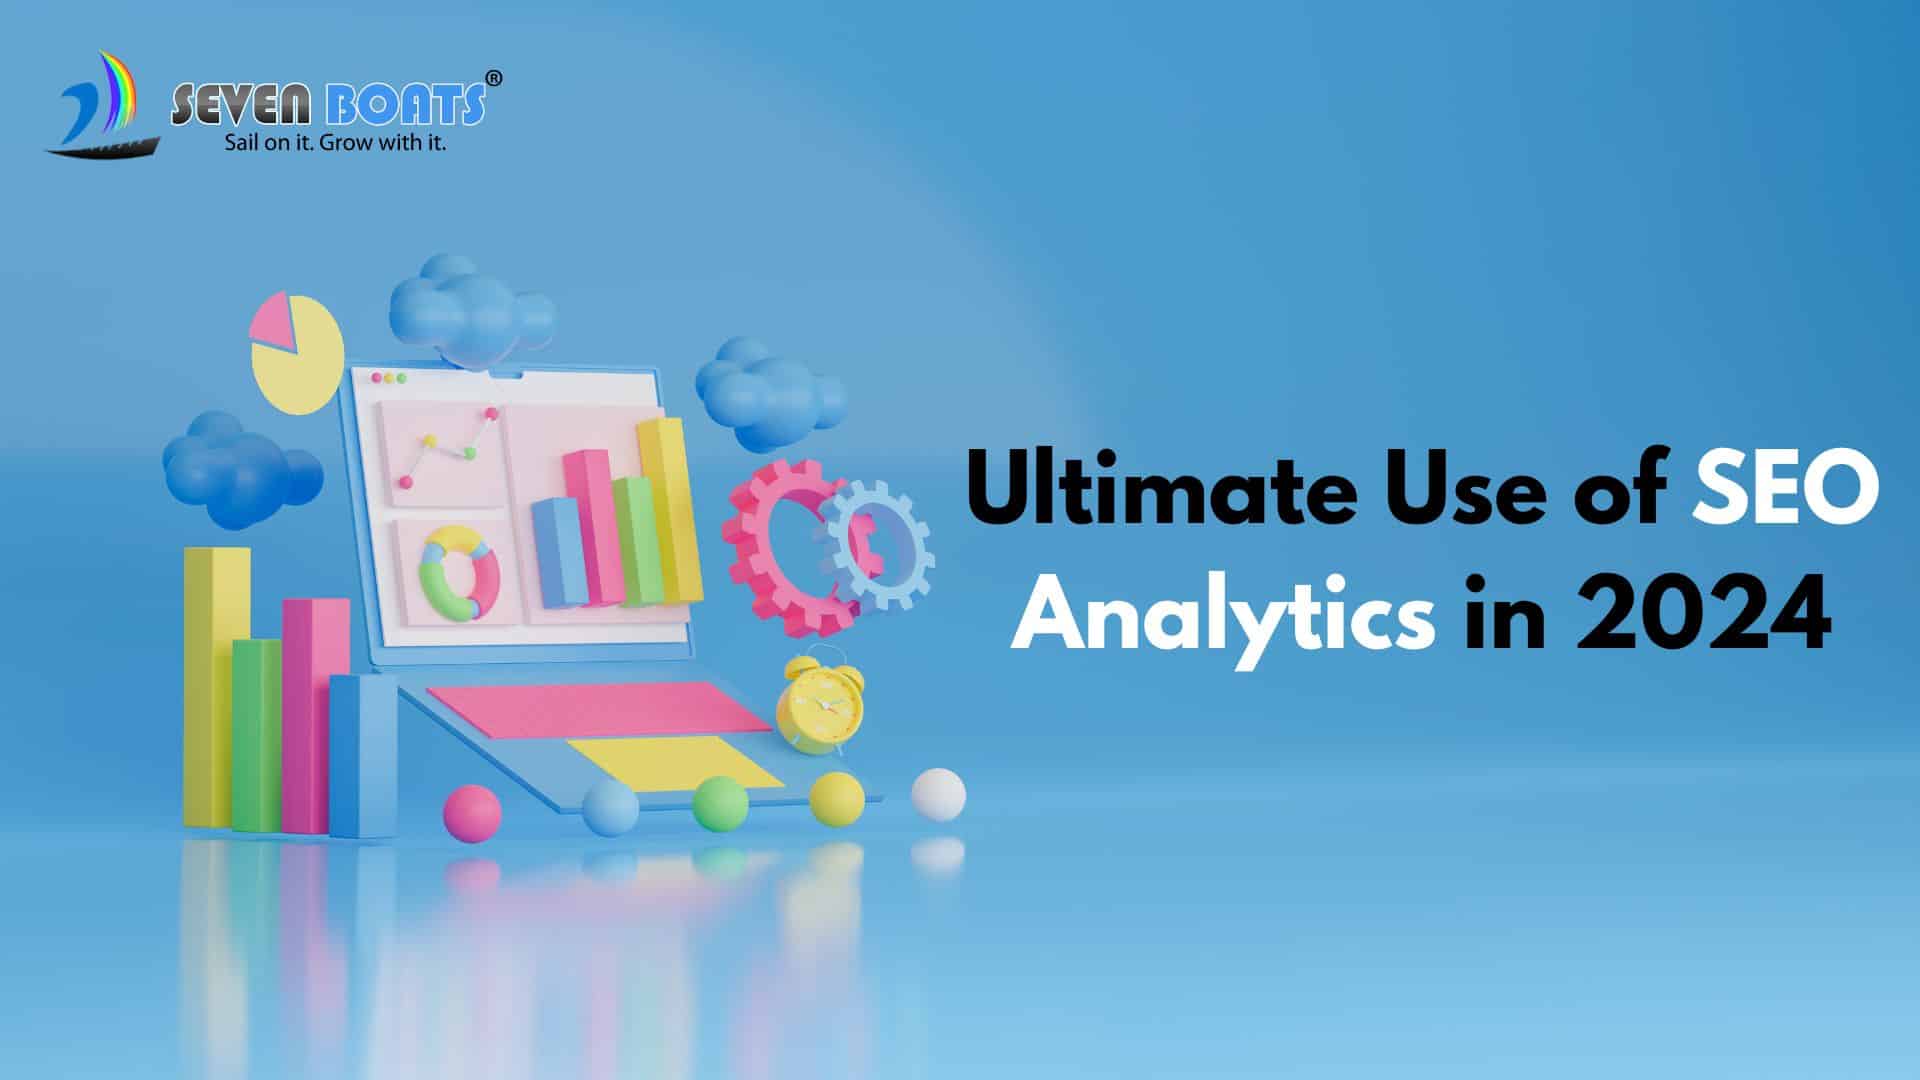 Ultimate Use of SEO Analytics in 2024